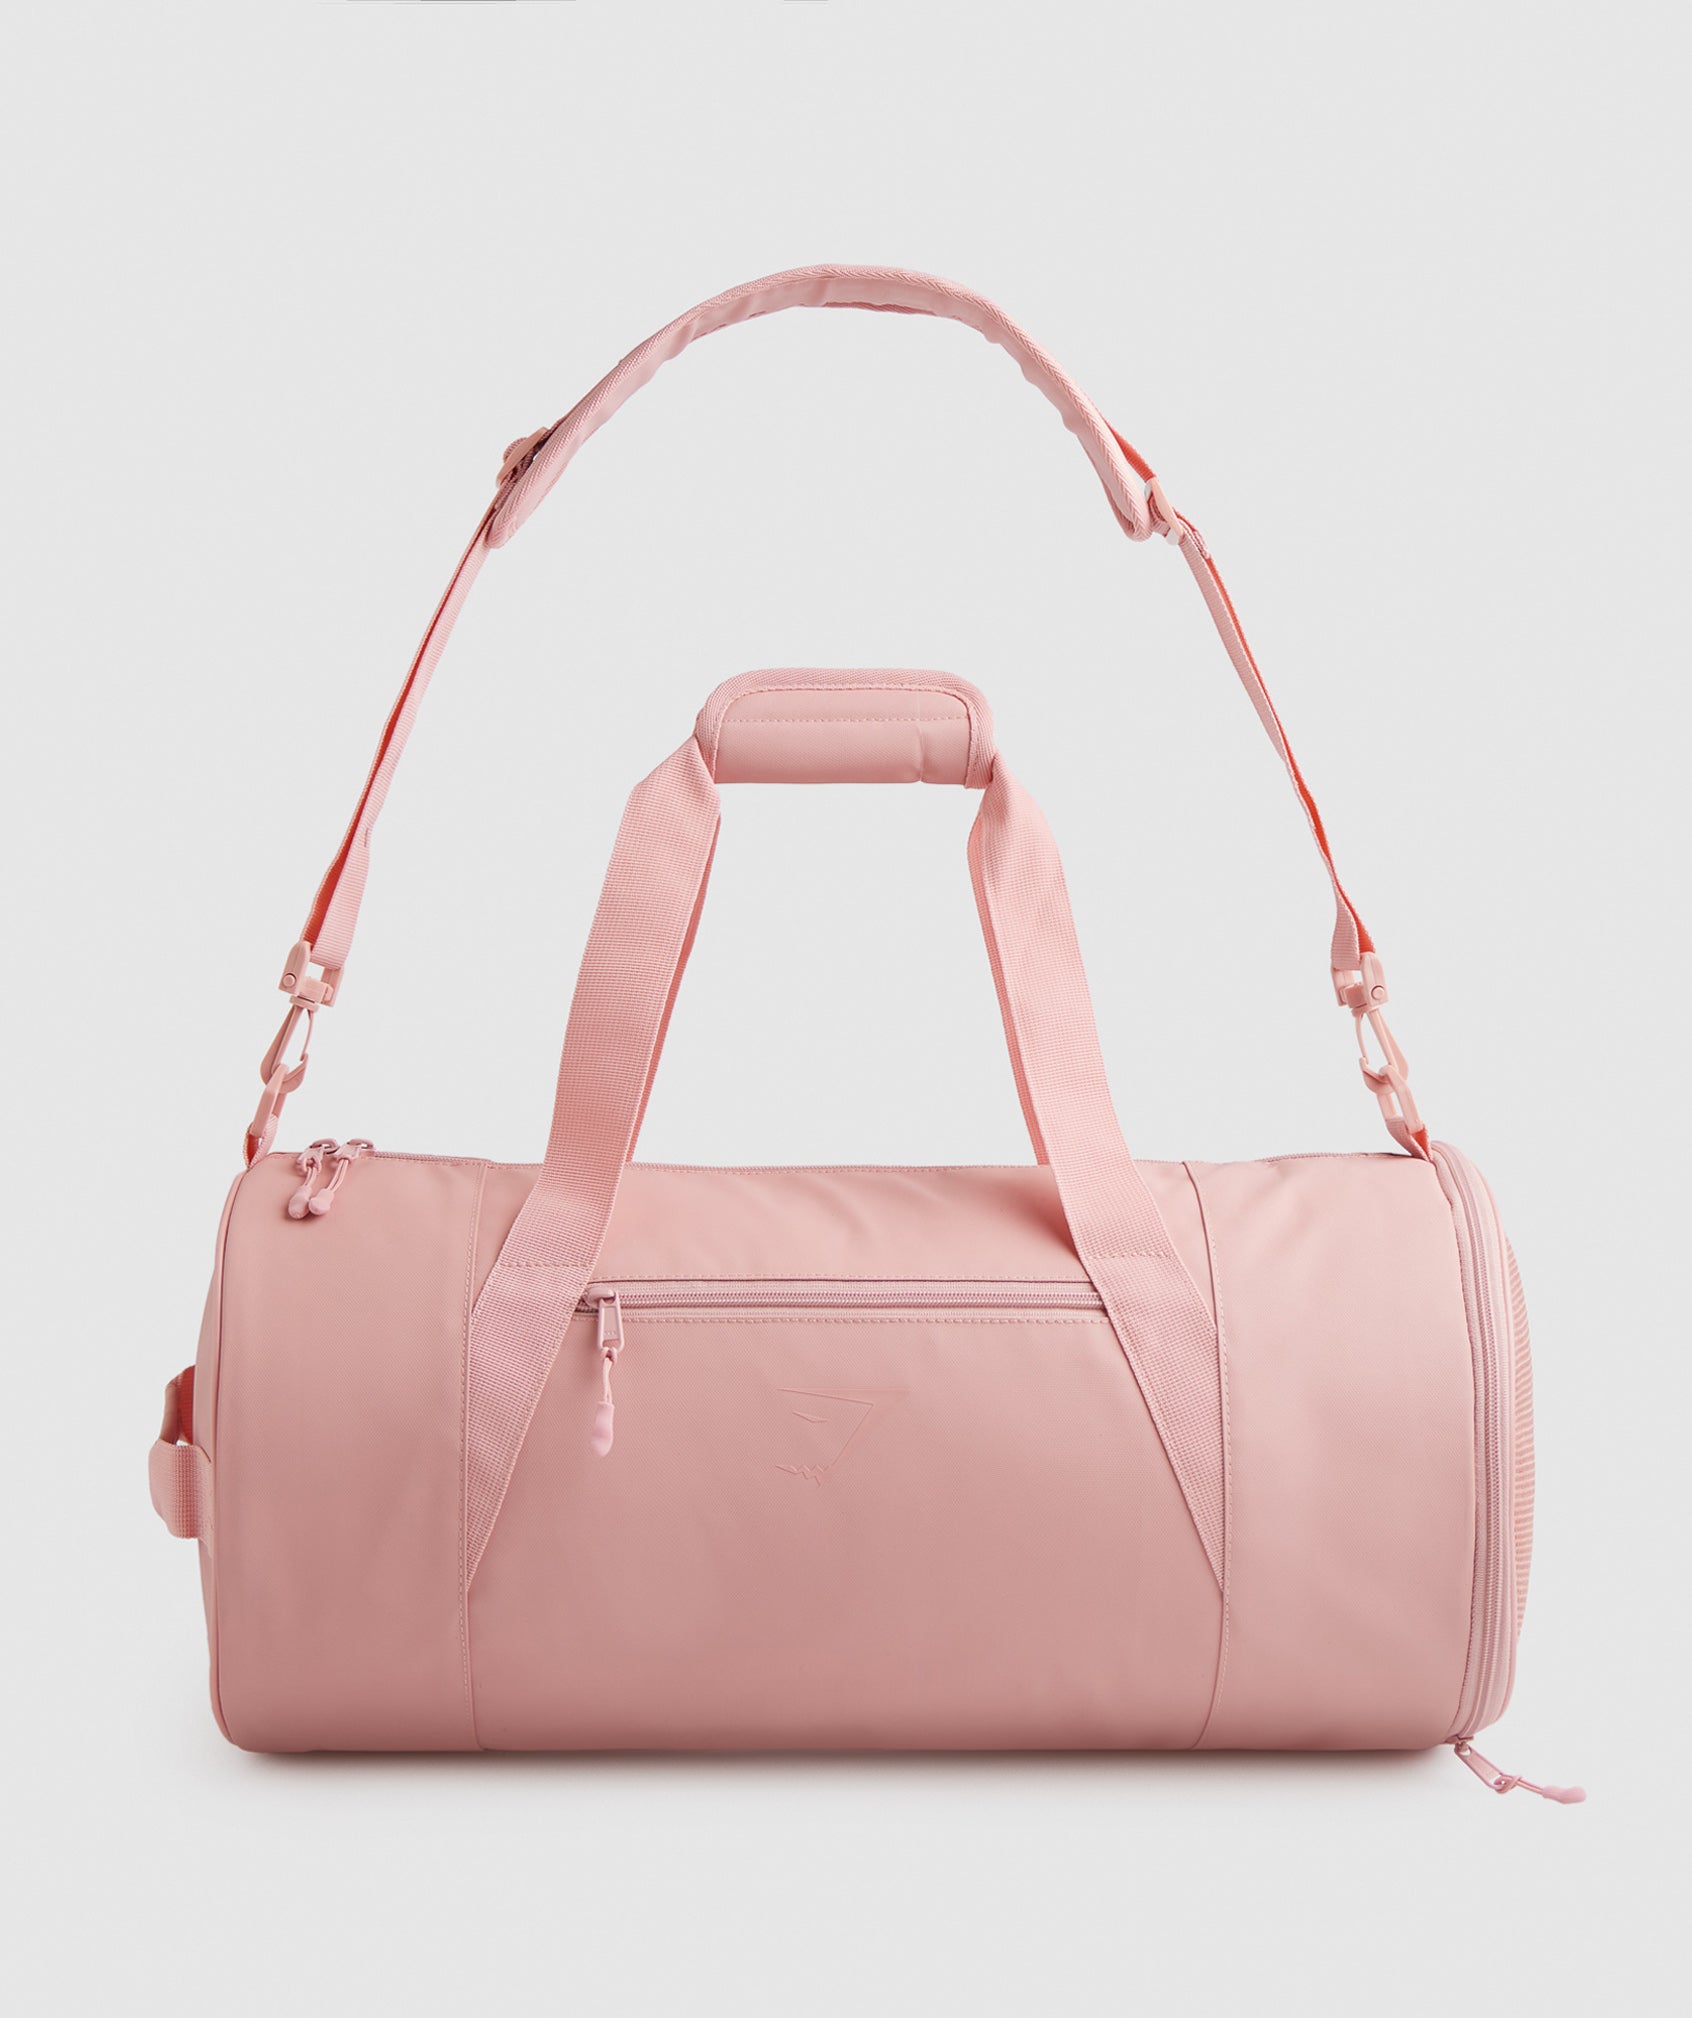 Barrel Bag in Paige Pink - view 1